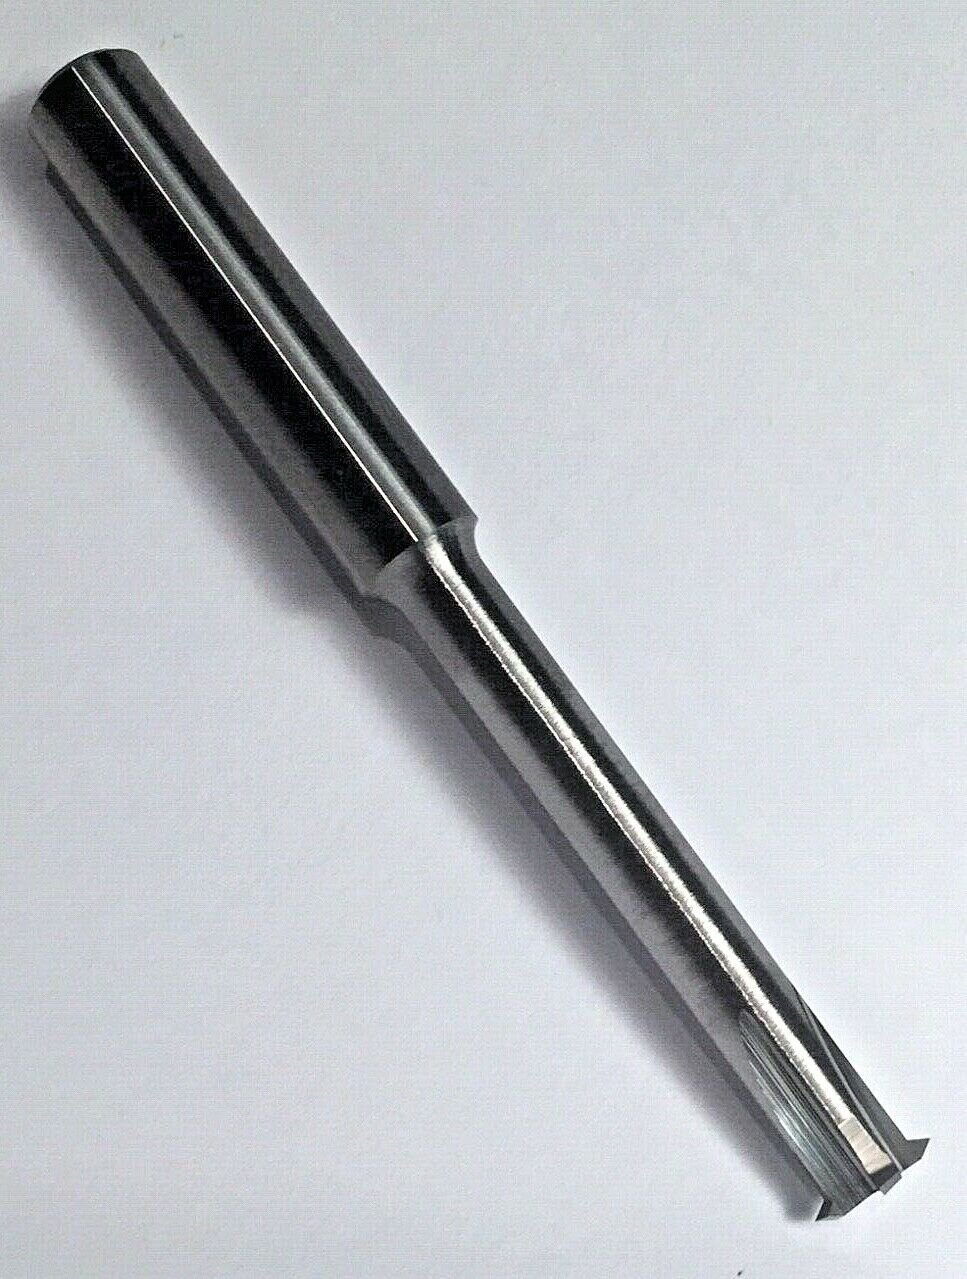 1/4" Solid Carbide Single Form Thread Mill 20-56 TPI x 1/2" Reach Made in USA 